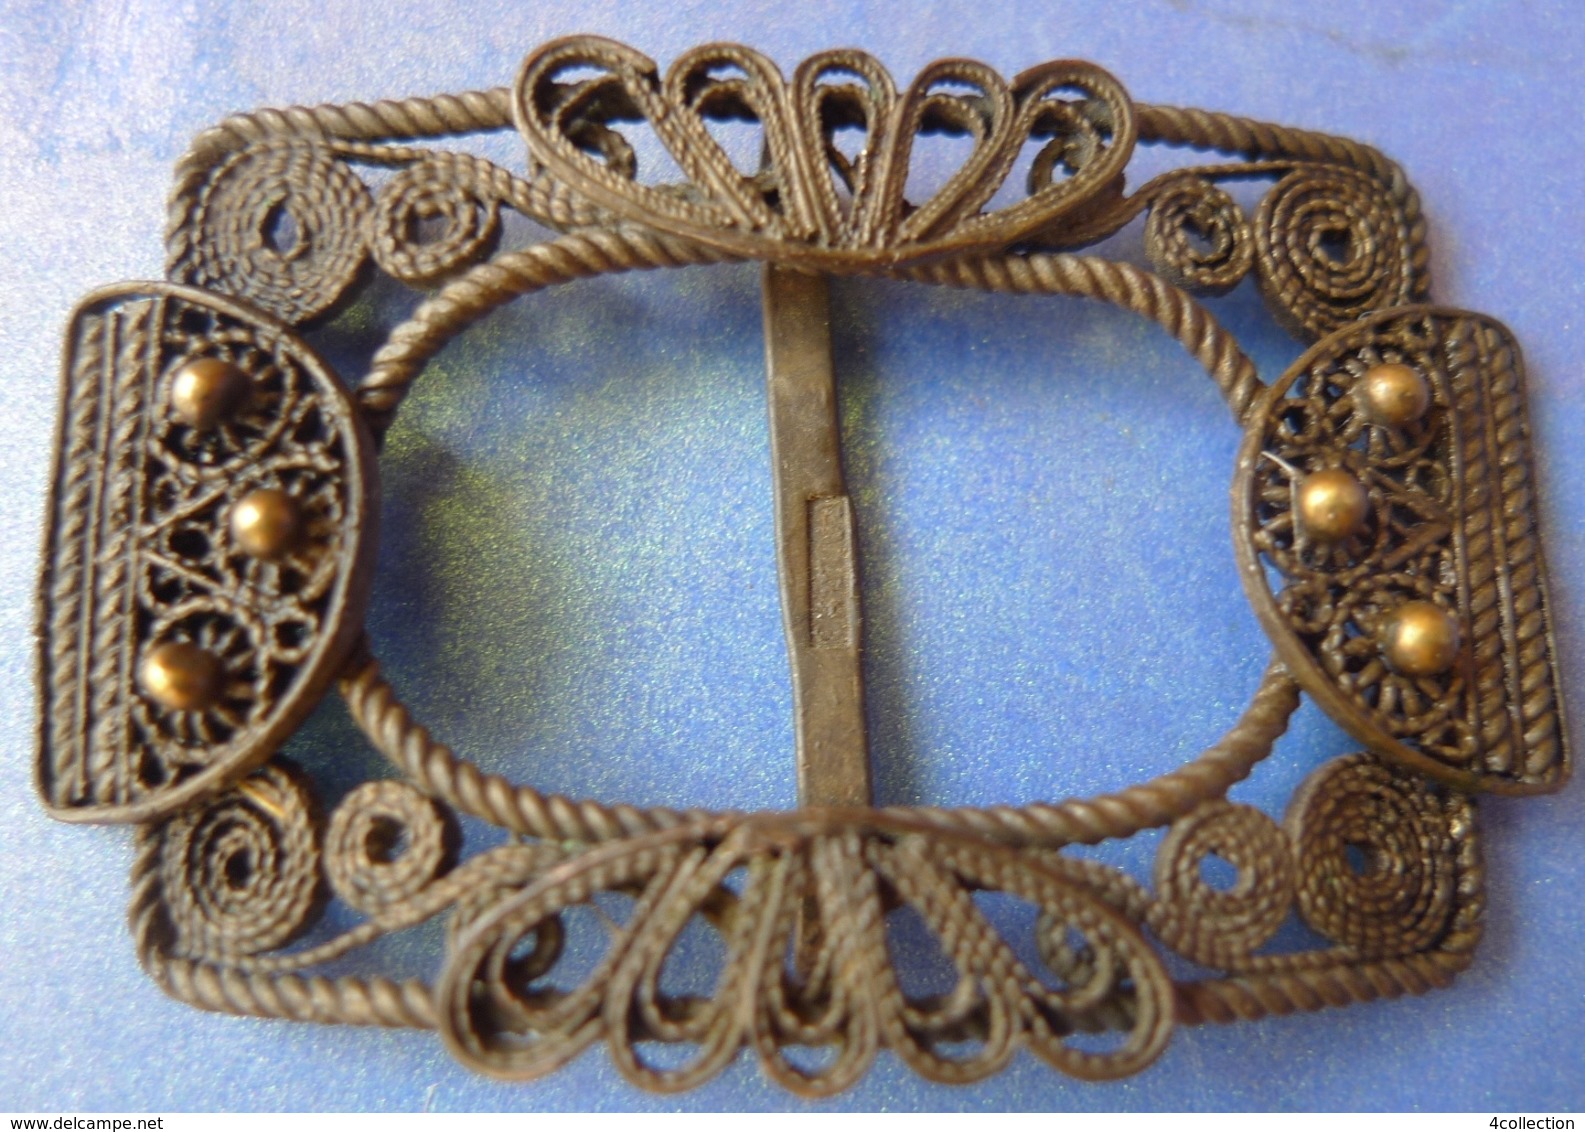 Antique Accessories Soviet USSR Latvia Filigree Belt BUCKLE Collectibles Marked - Belts & Buckles